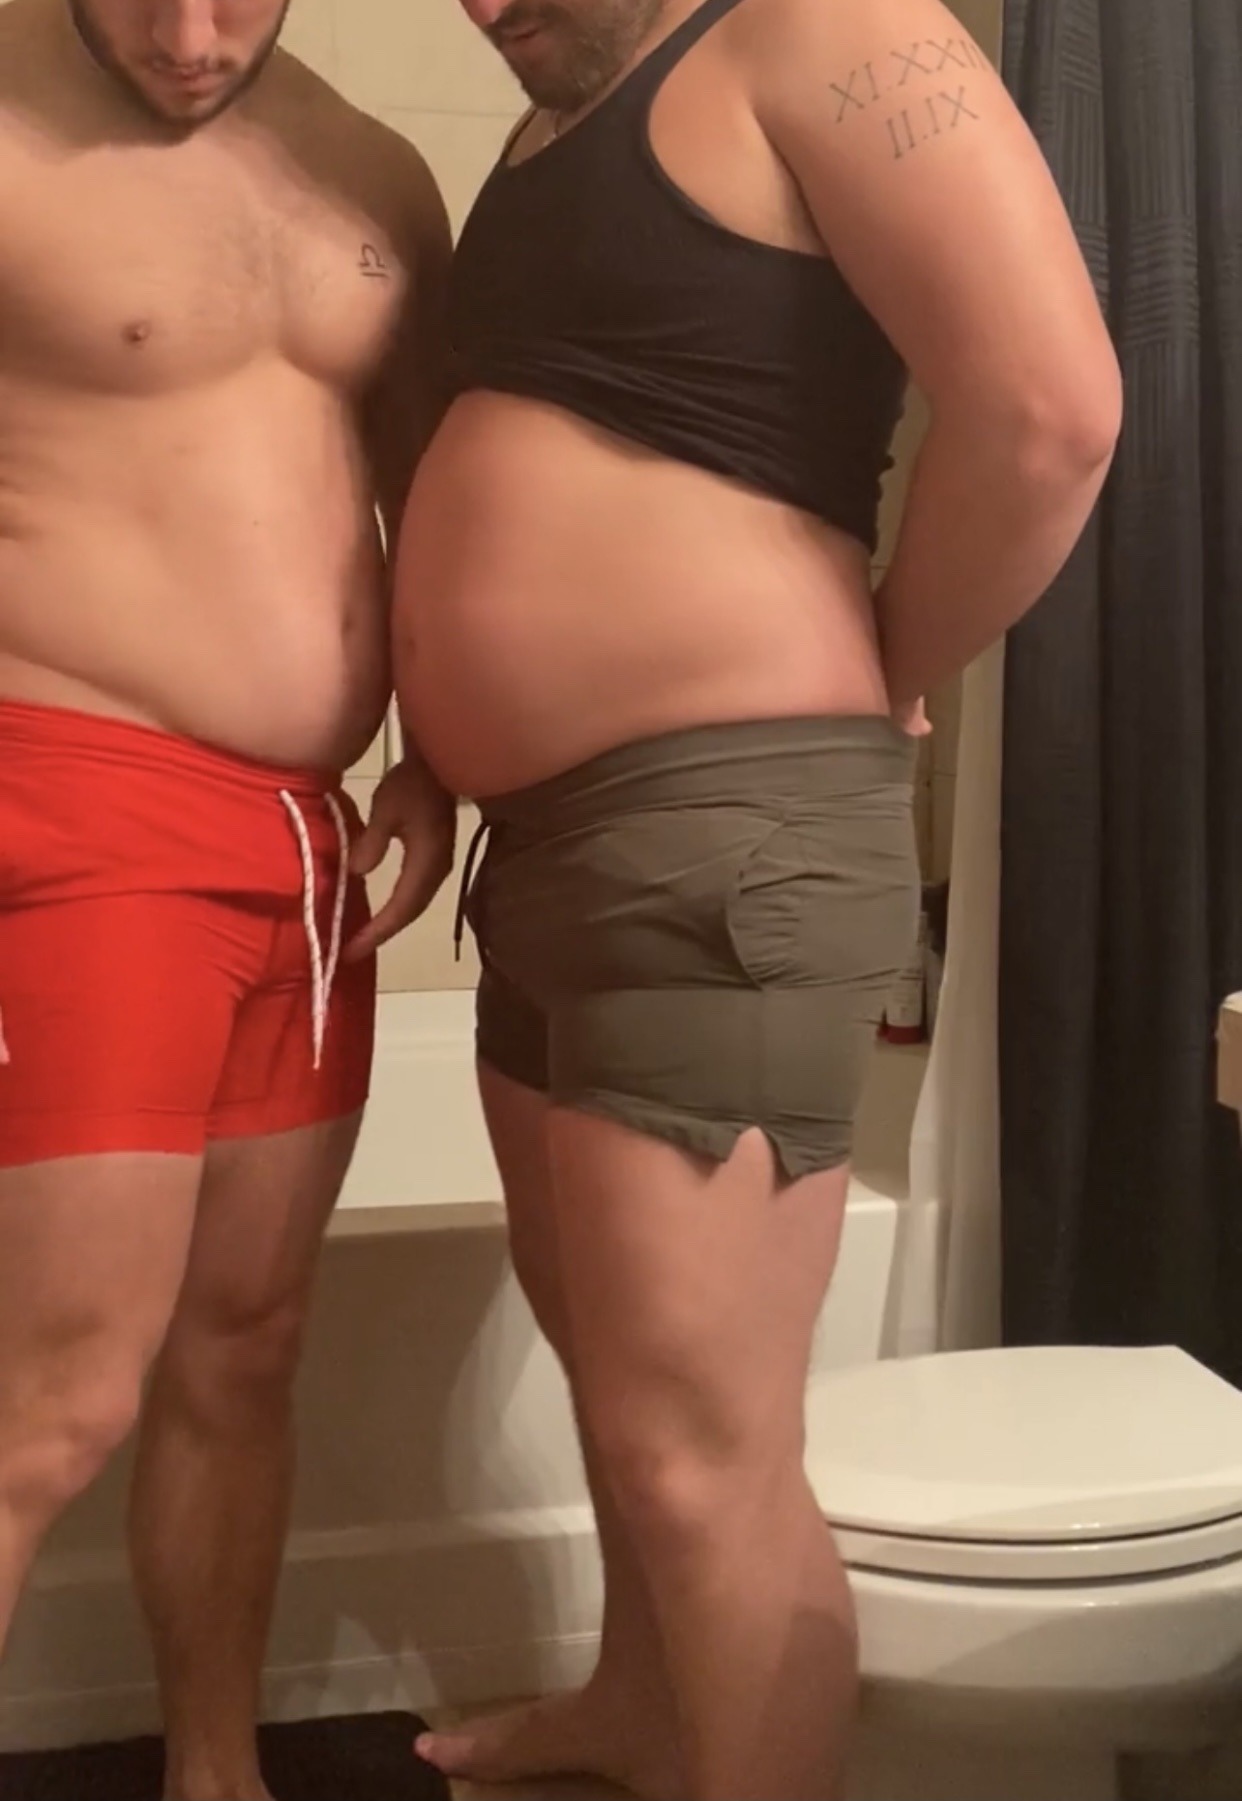 thic-as-thieves:These swim trunks almost didn’t fit…broke a sweat trying to get them on! Wait until y’all see the before and after pic! Video on our site, link in bio! 